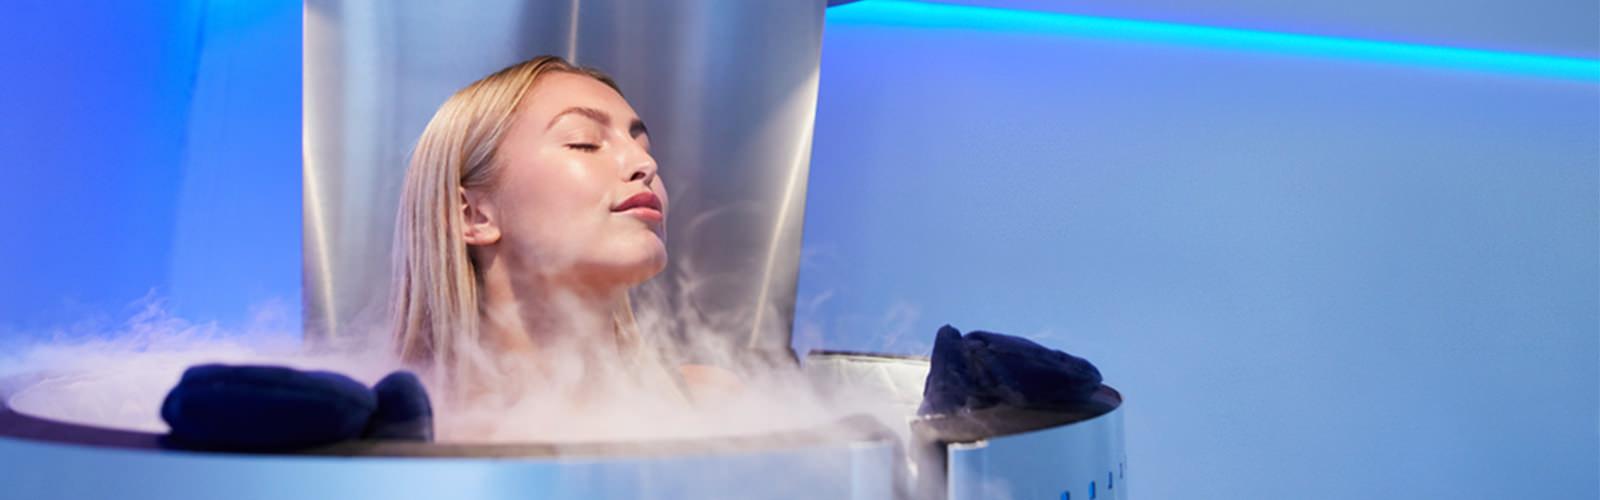 women coming out of cryotherapy machine